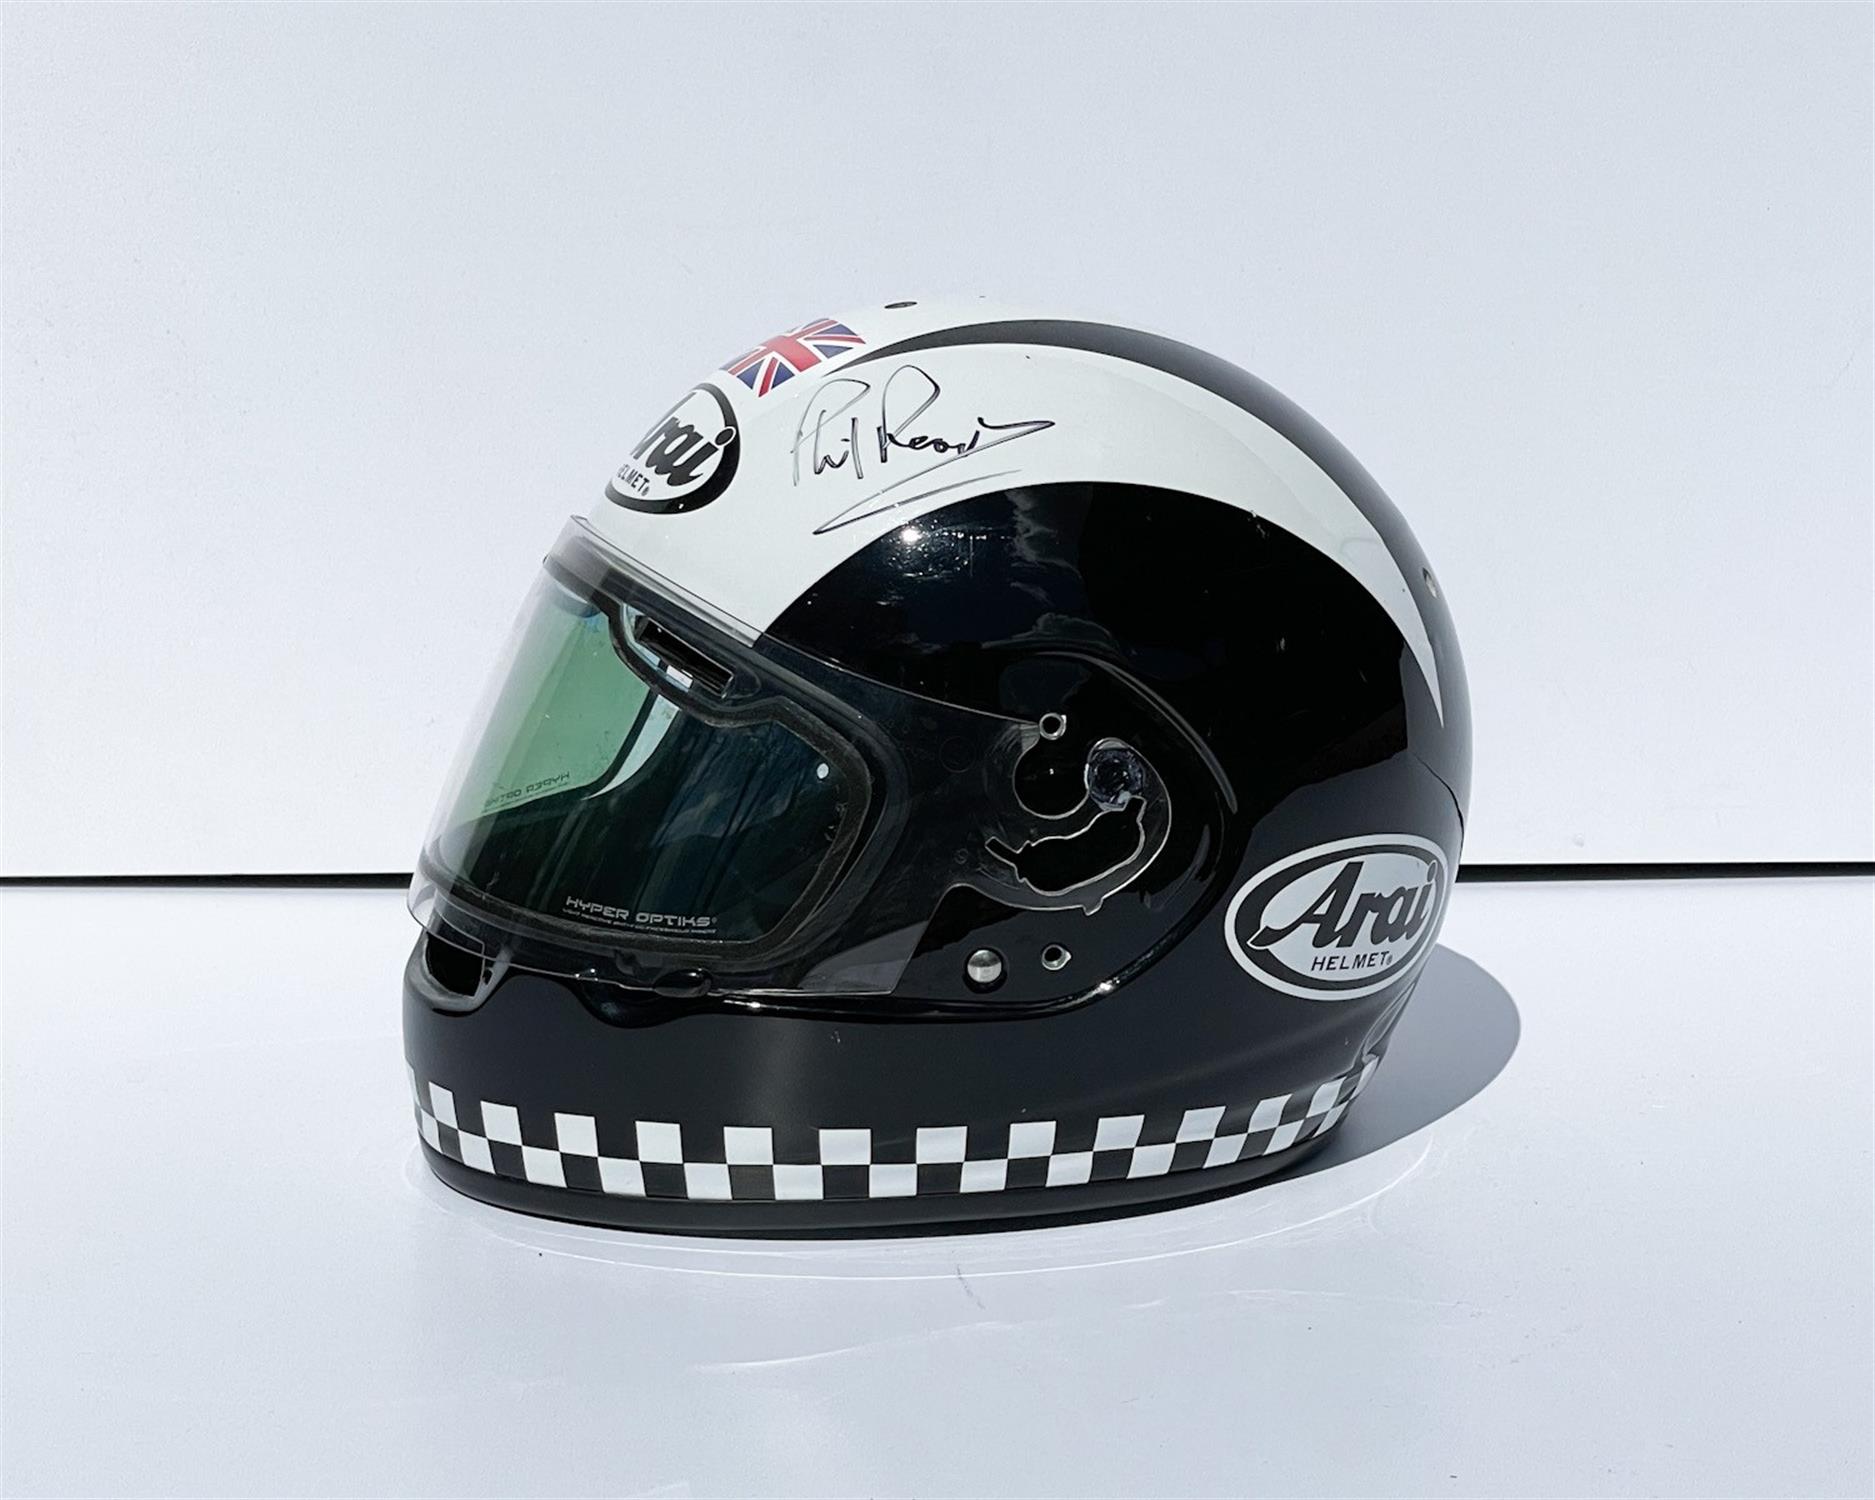 Phil Read Trophy, Replica Helmet and Programme - Image 2 of 2